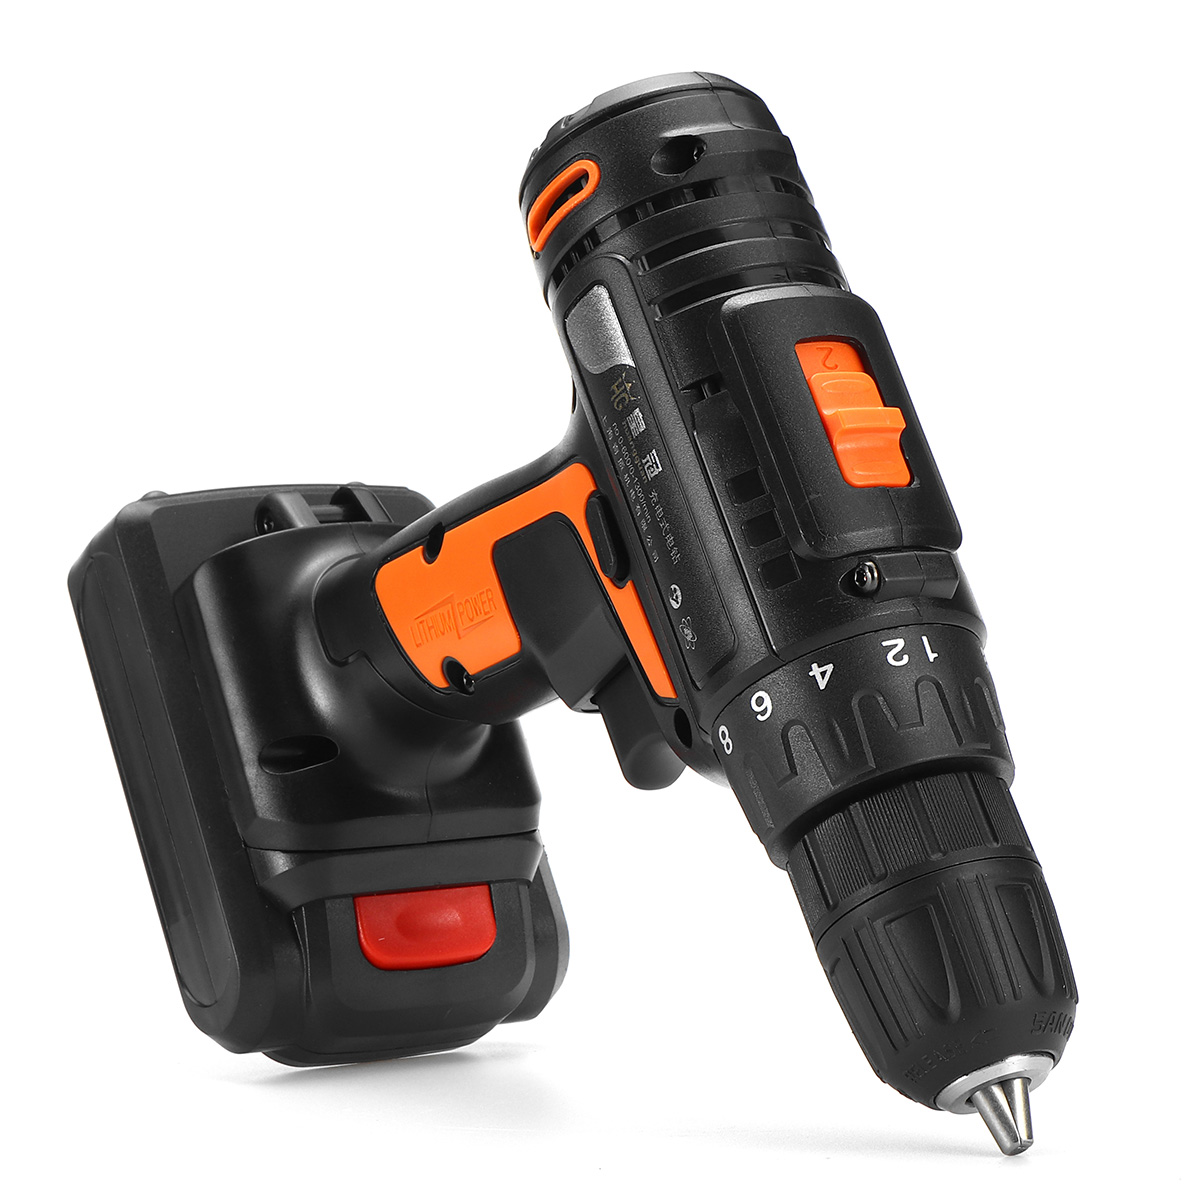 48V-Electric-Drill-Cordless-Rechargeable-Screwdriver-Drill-Screw-Set-Repair-Tools-Kit-1501700-4